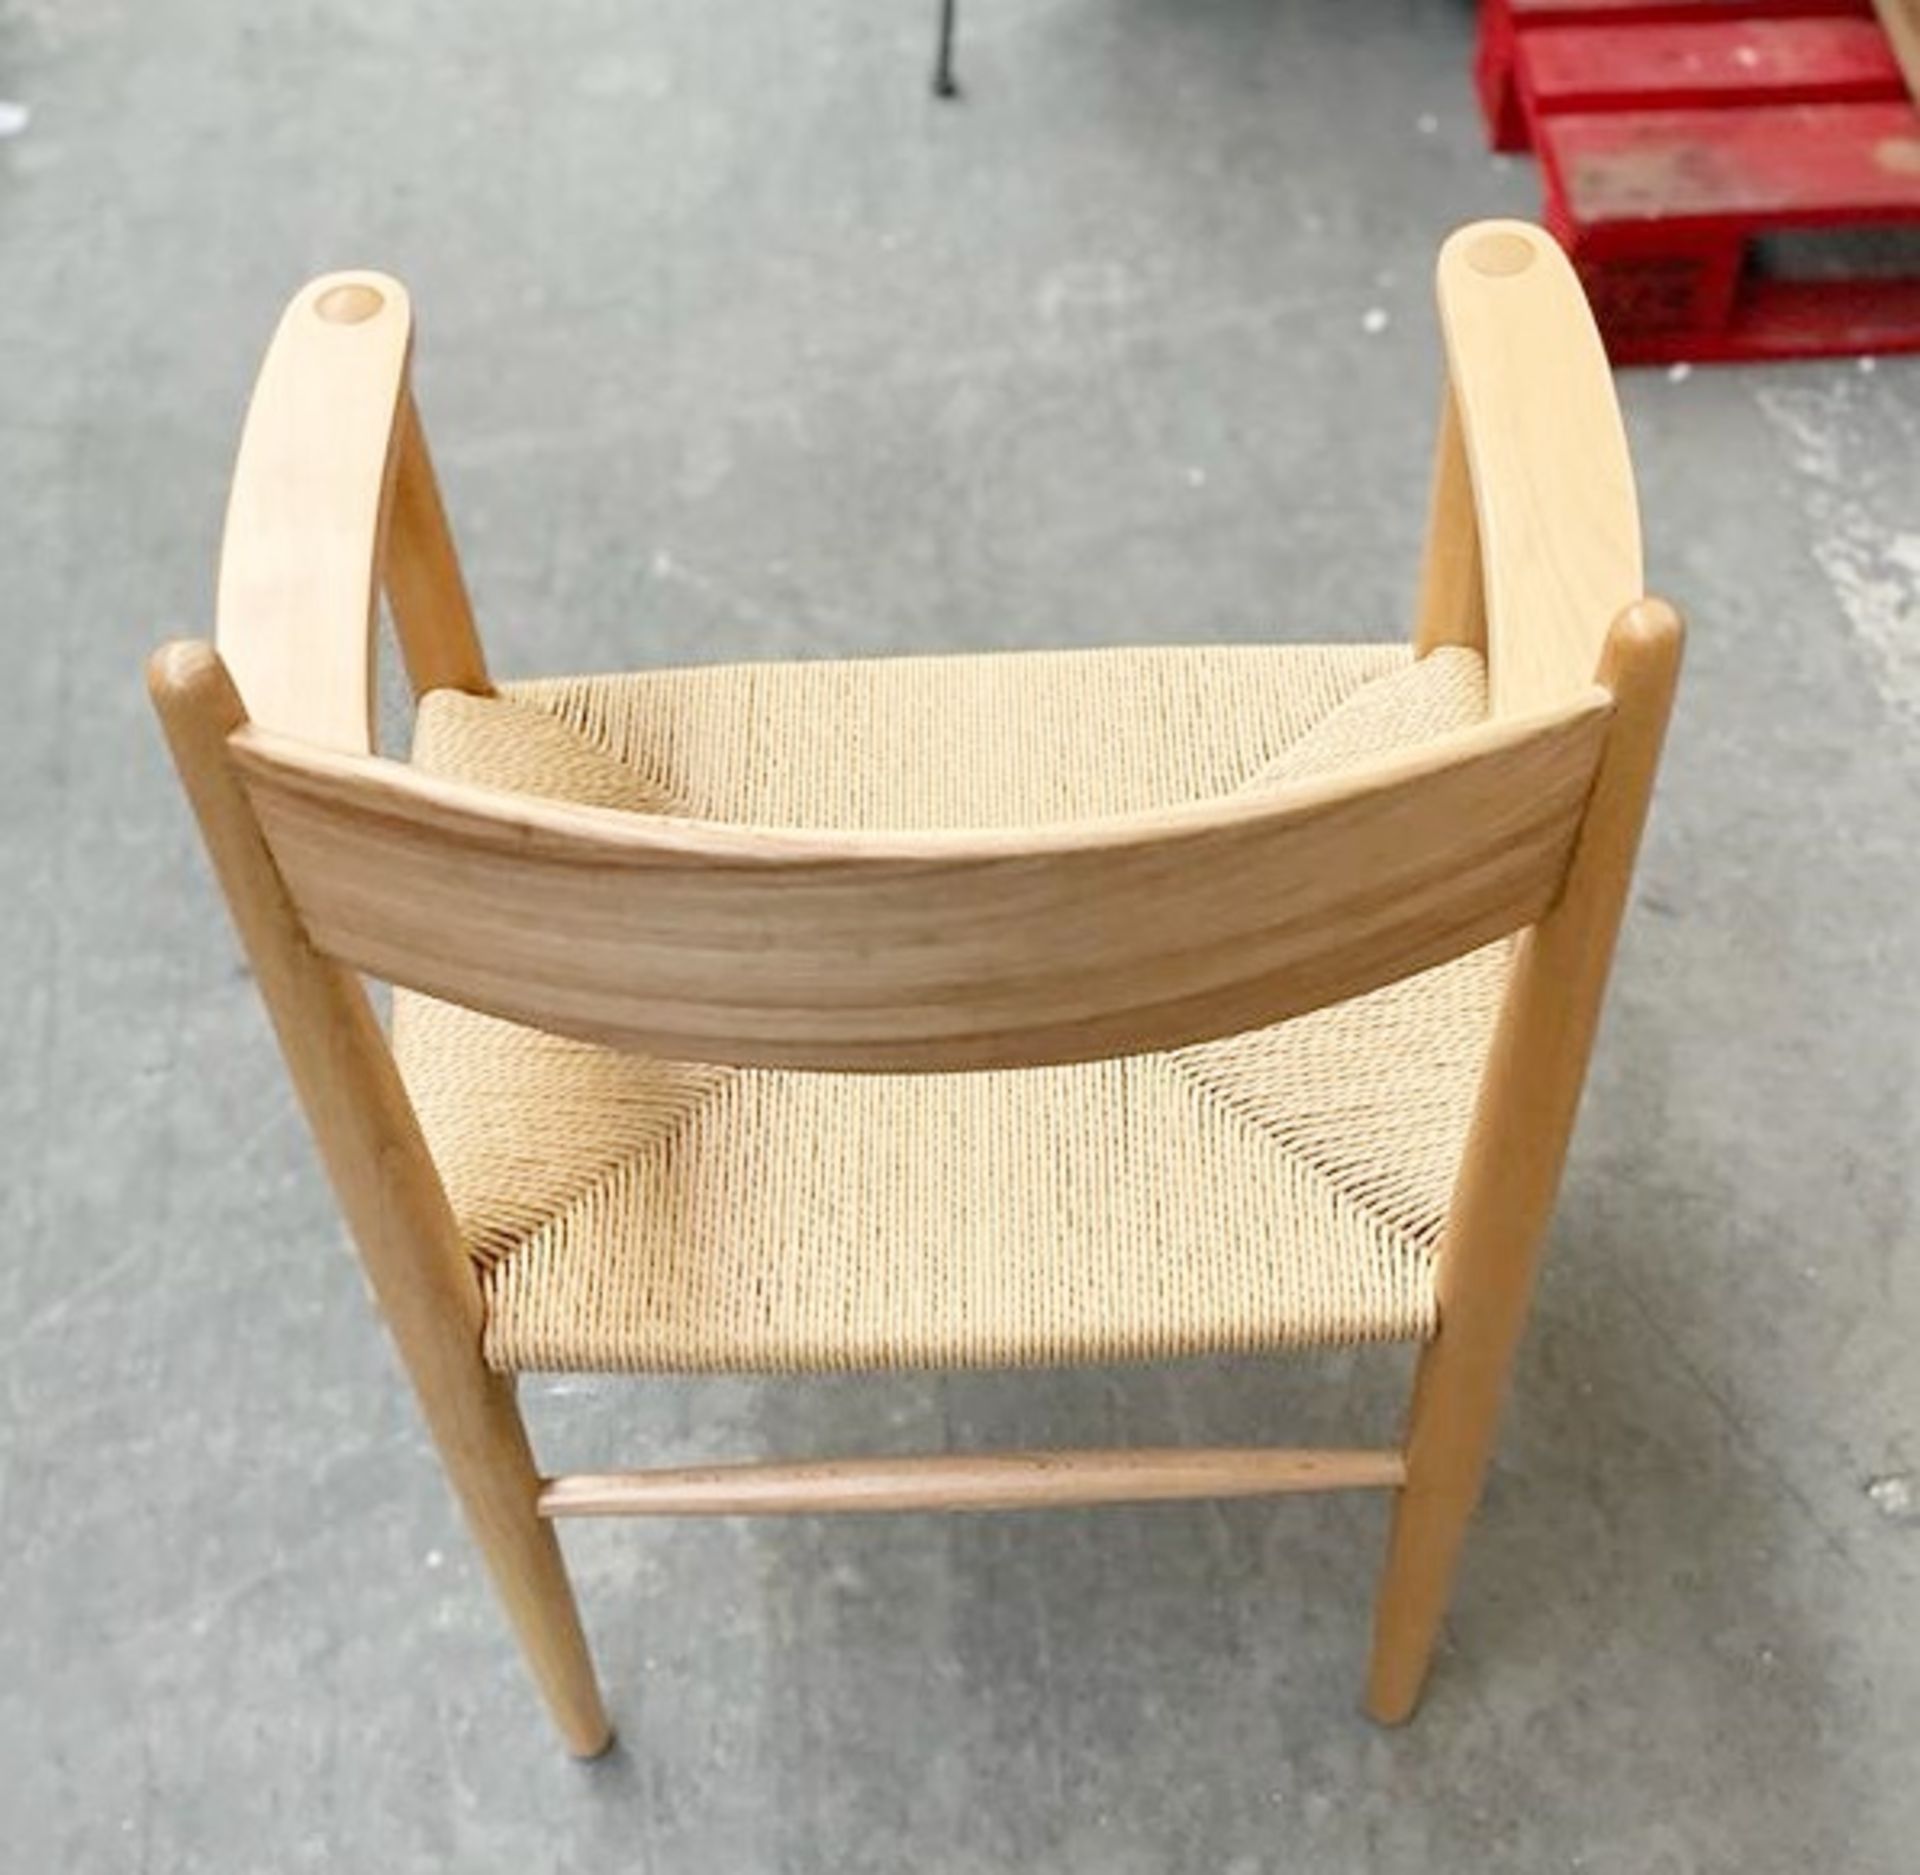 2 x Nielsen Natural + Natural Cord Chair With Arm Rests - Dimensions: 50(h) x 48(d) x 58(w) cm - - Image 3 of 7